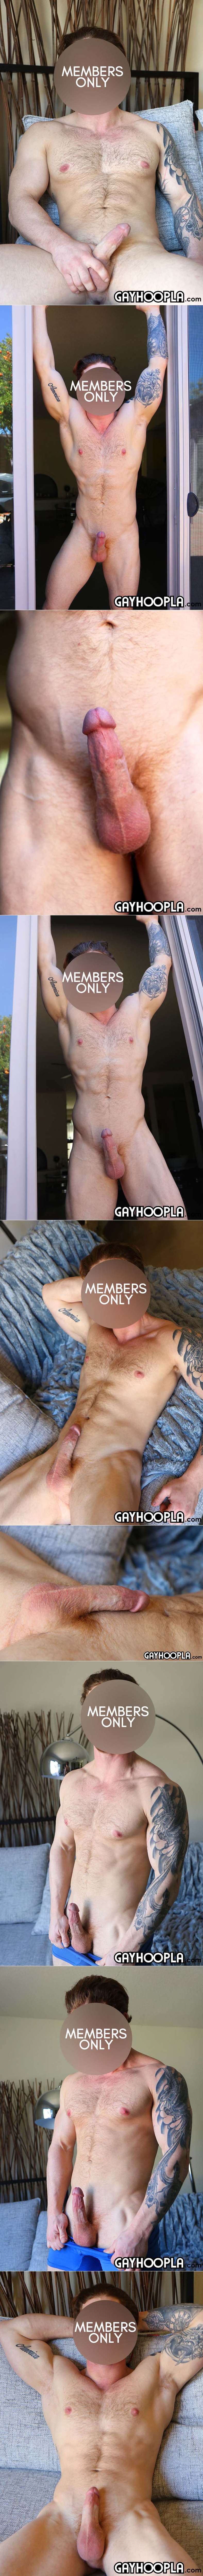 [Masked] Mystery Members Only Model #22 at GayHoopla